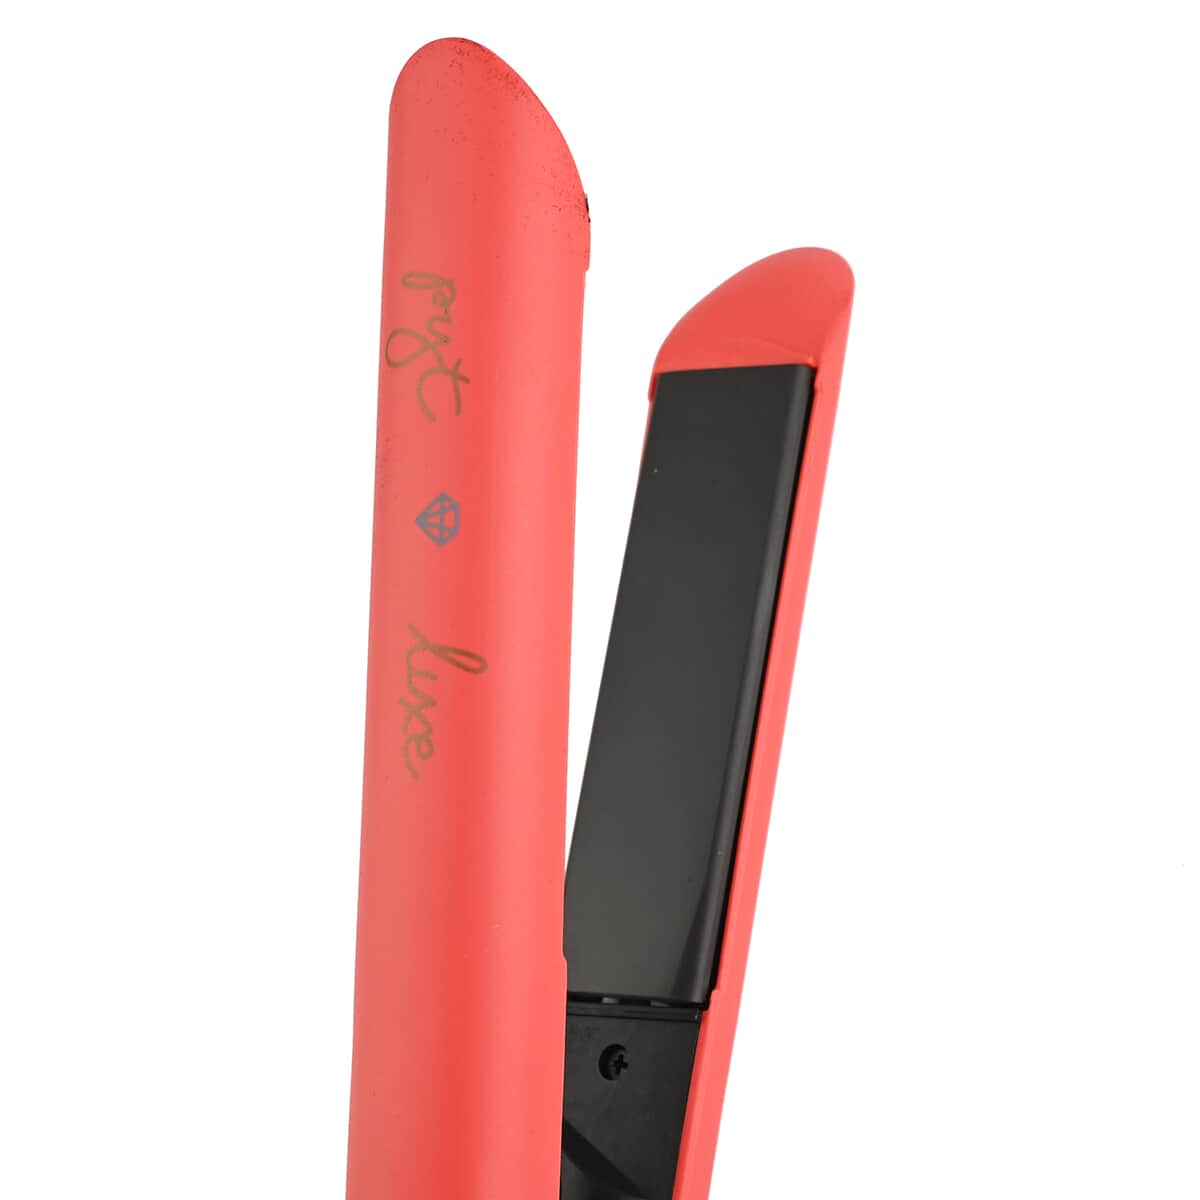 PYT 1" Ion Fusion 2.0 Pro Digital Ceramic Flat Iron - Coral image number 6